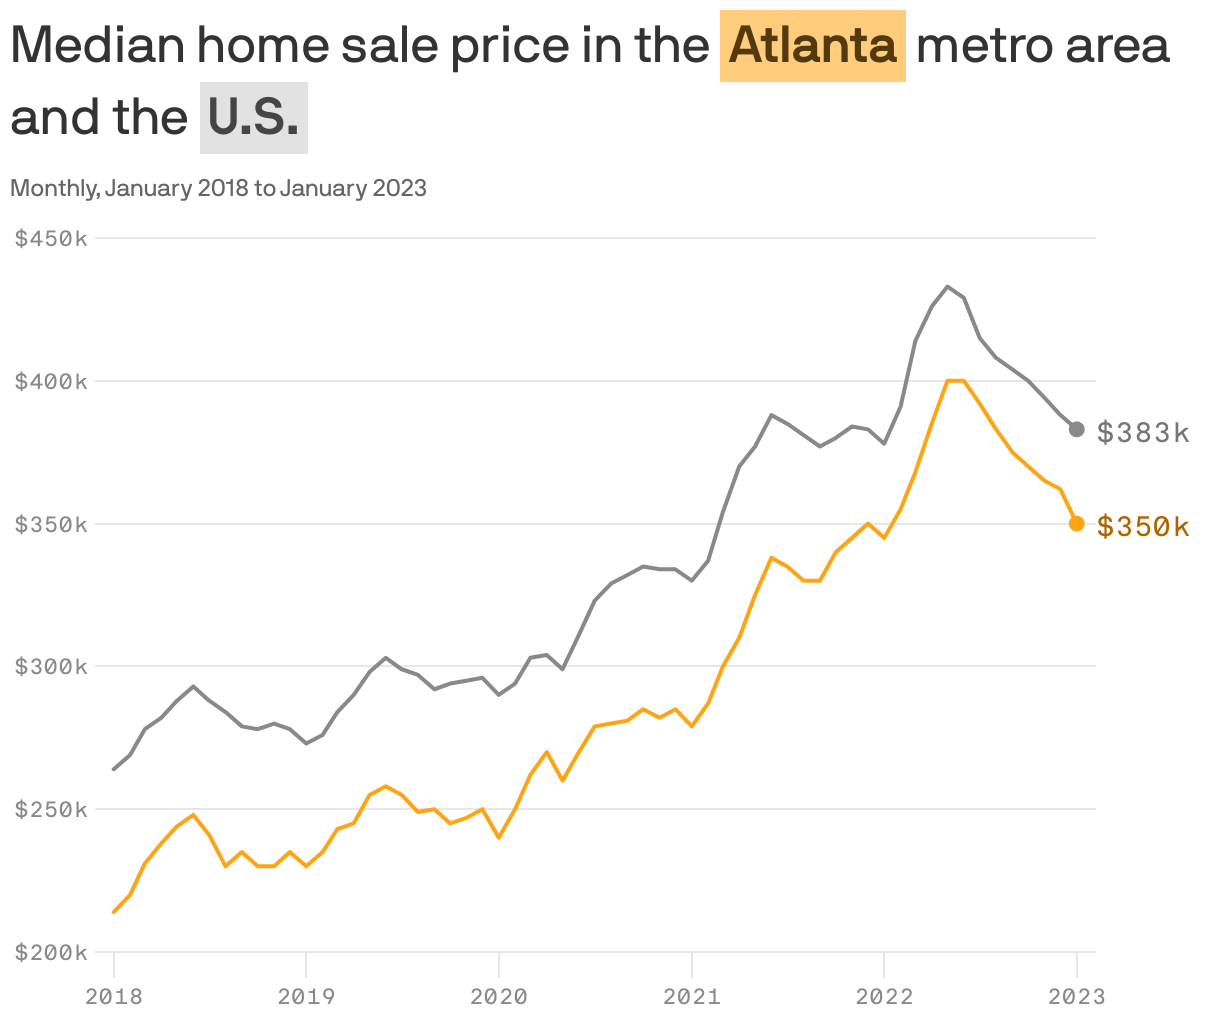 Median home sale price in the <b style='background-color: #FFCD7B; color: #53390E; display: inline-block; padding: 1px 4px; whitespace: no-wrap;'>Atlanta</b> metro area and the <b style='background-color: #E2E2E2; color: #454545; display: inline-block; padding: 1px 4px; whitespace: no-wrap;'>U.S.</b>